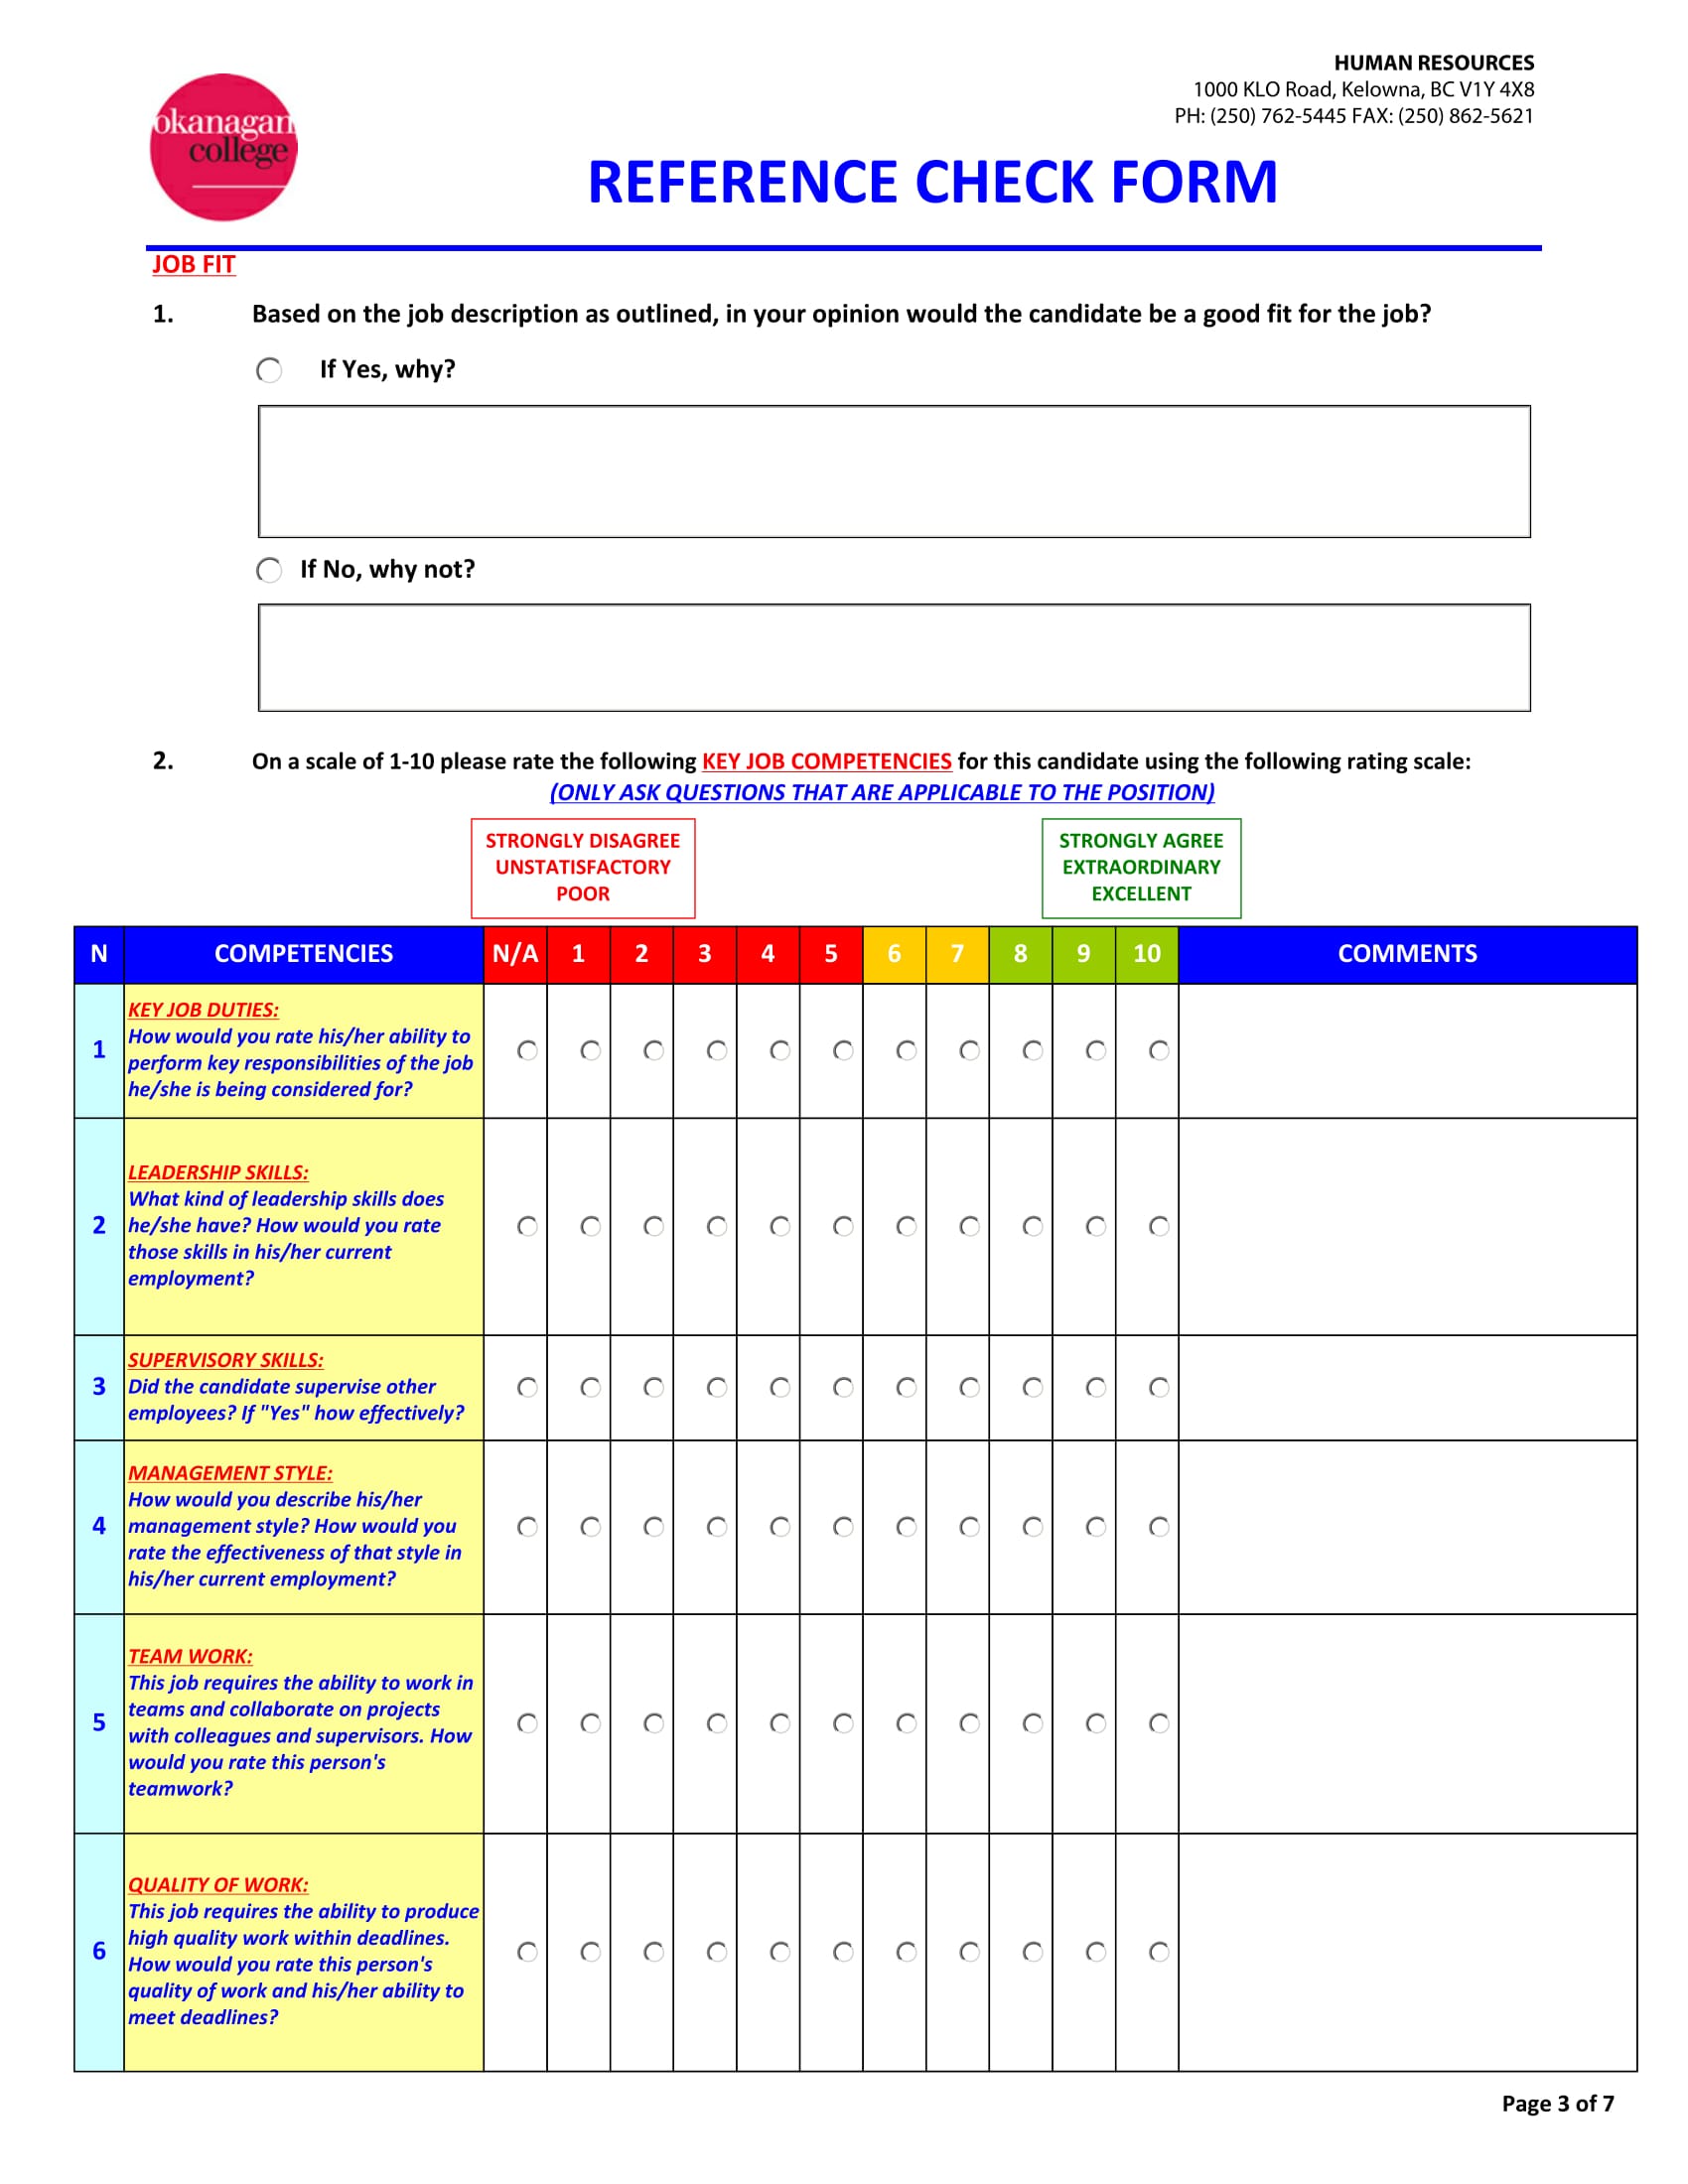 job competencies reference check form 3